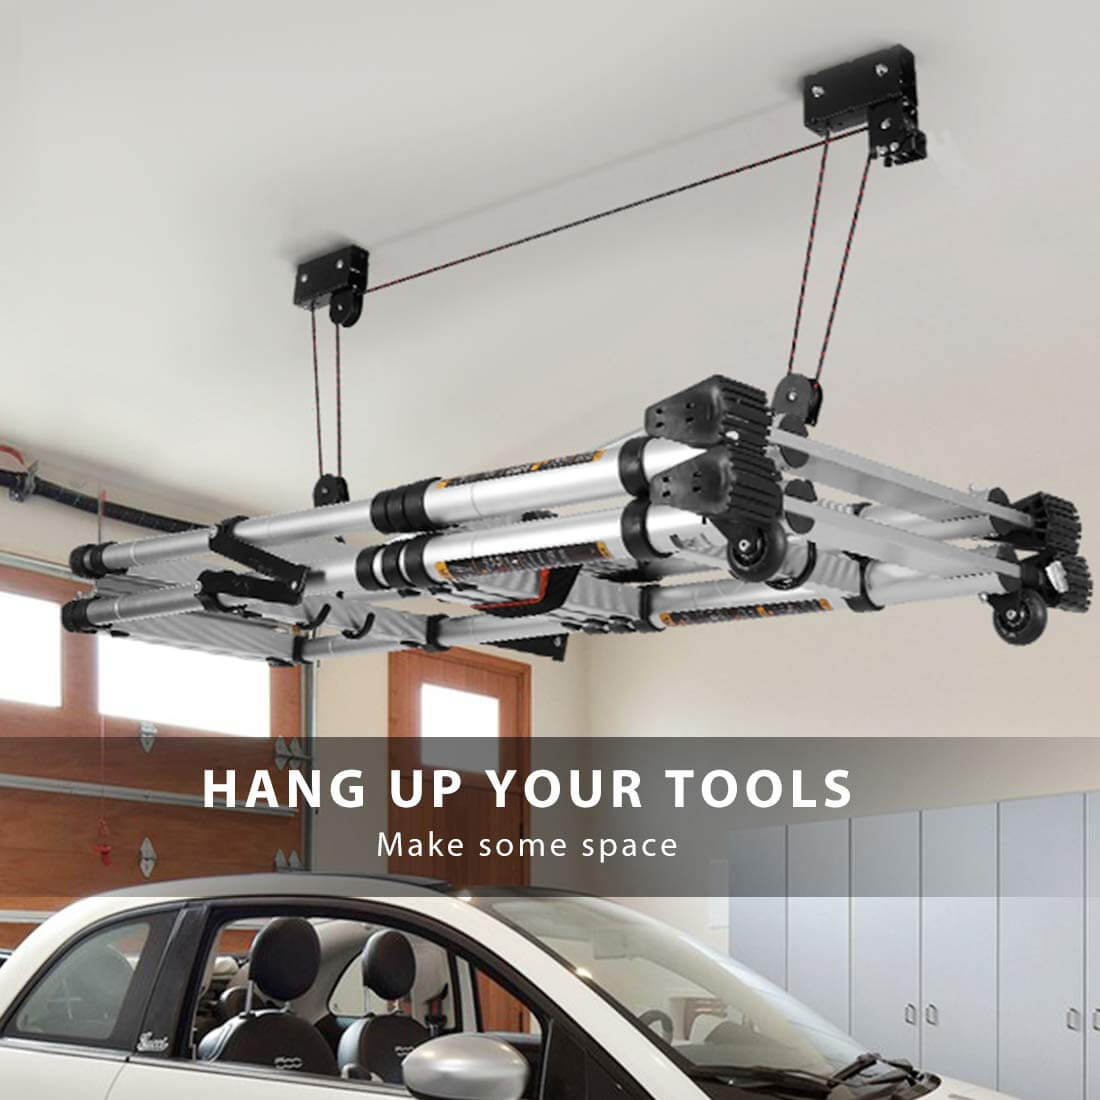 VIVOHOME Heavy Duty 2-Pack 125 Lbs Capacity Ceiling Mounted Bicycle Kayak Canoe Garage Storage Rack Lift Hoists with Pulley System Upgraded Edition